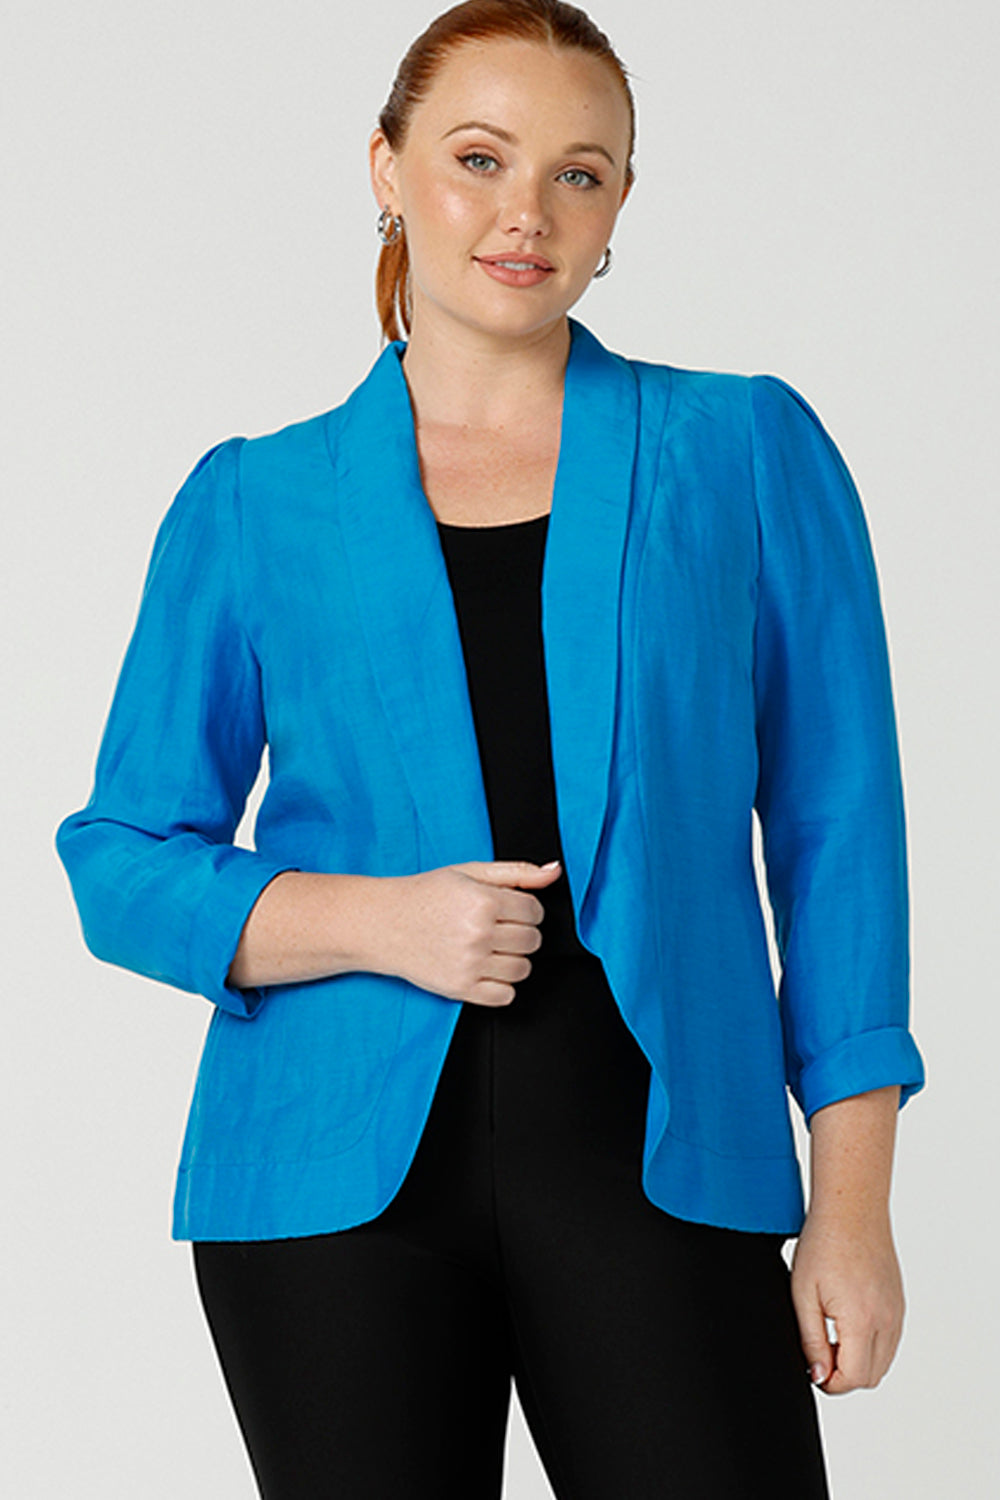 A curvy size, size 12 woman wearing a longline blazer in opal blue tencel fabric. This lightweight jacket is comfortable for your everyday workwear, casual and travel capsule wardrobe. Shop this Australian-made blazer online in sizes 8 to 24, petite to plus sizes.